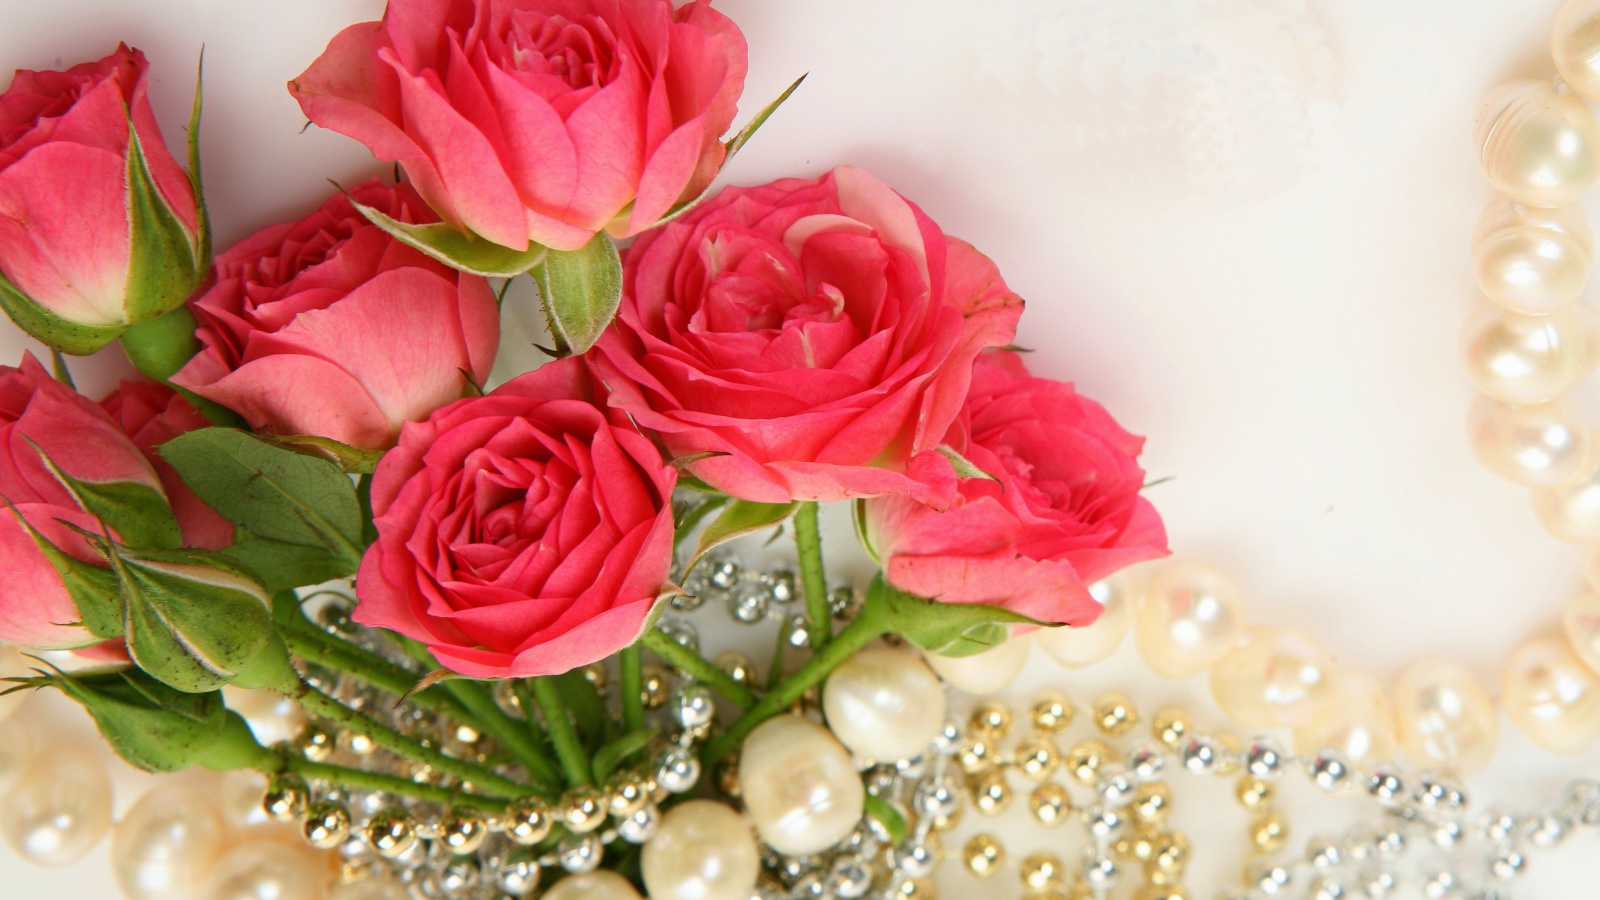 Necklace and Roses Bouquet wallpaper 1600x900